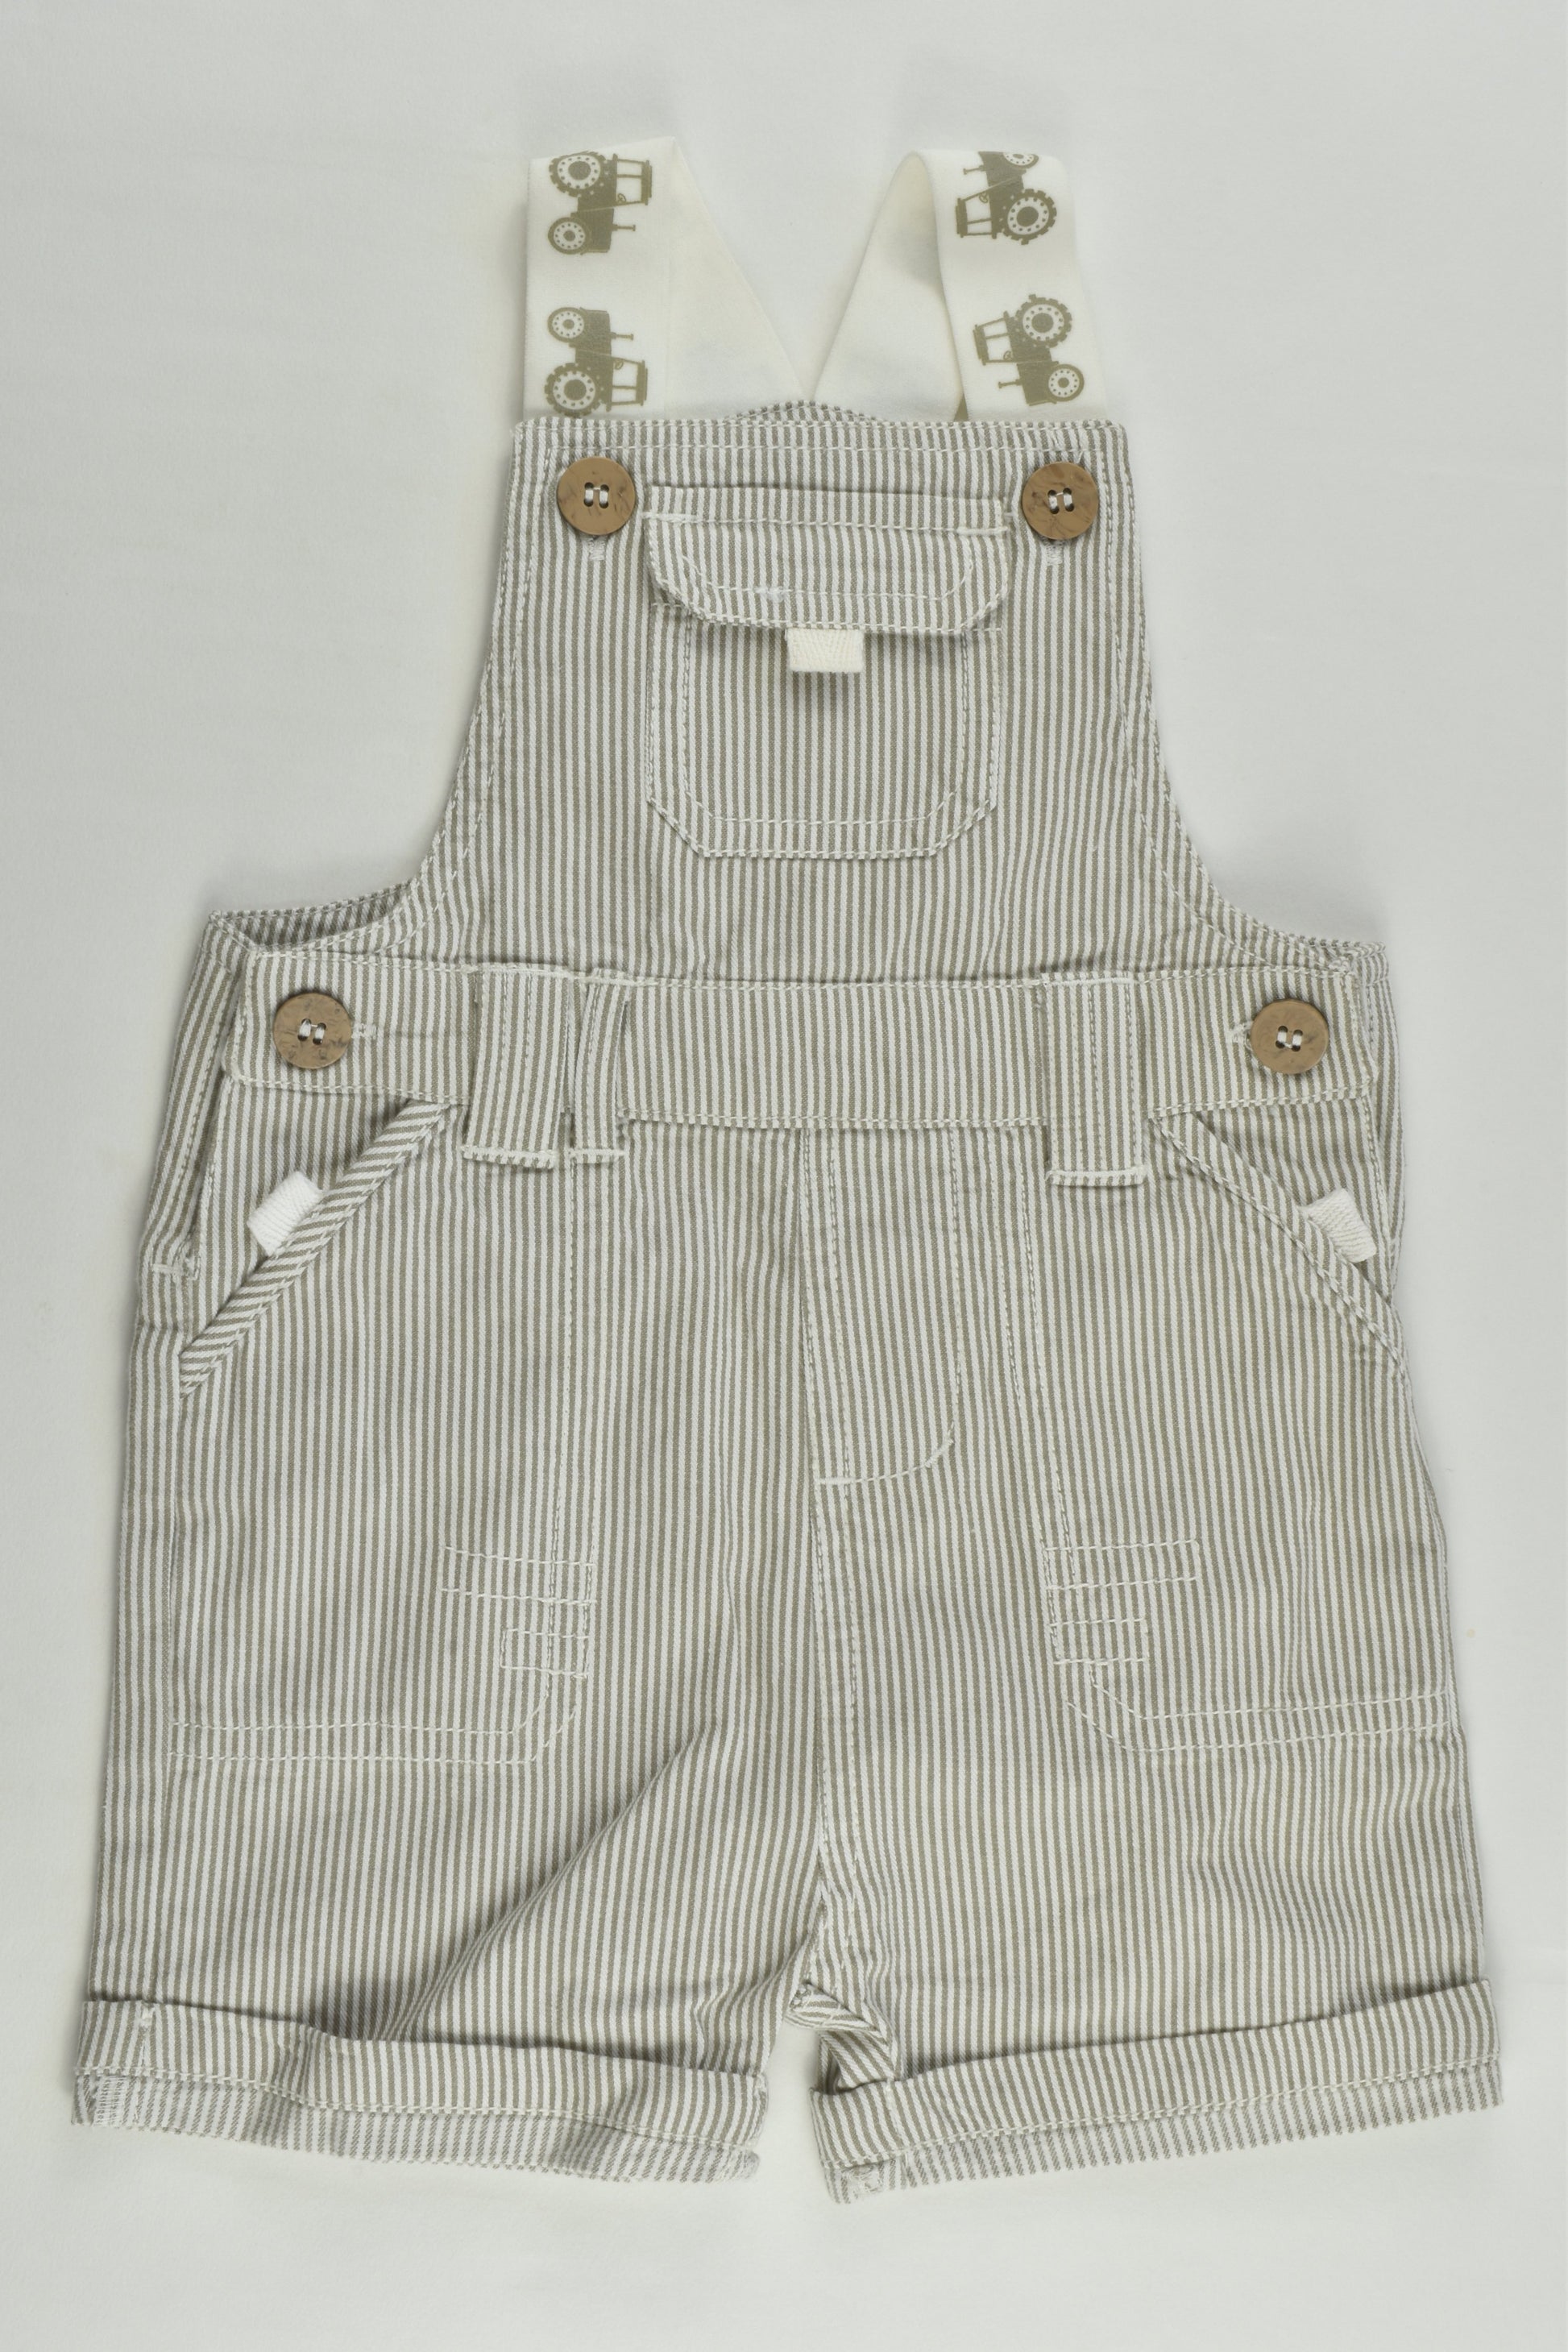 NEW M&Co Size 0 (9-12 months) Striped Tractor Short Overalls